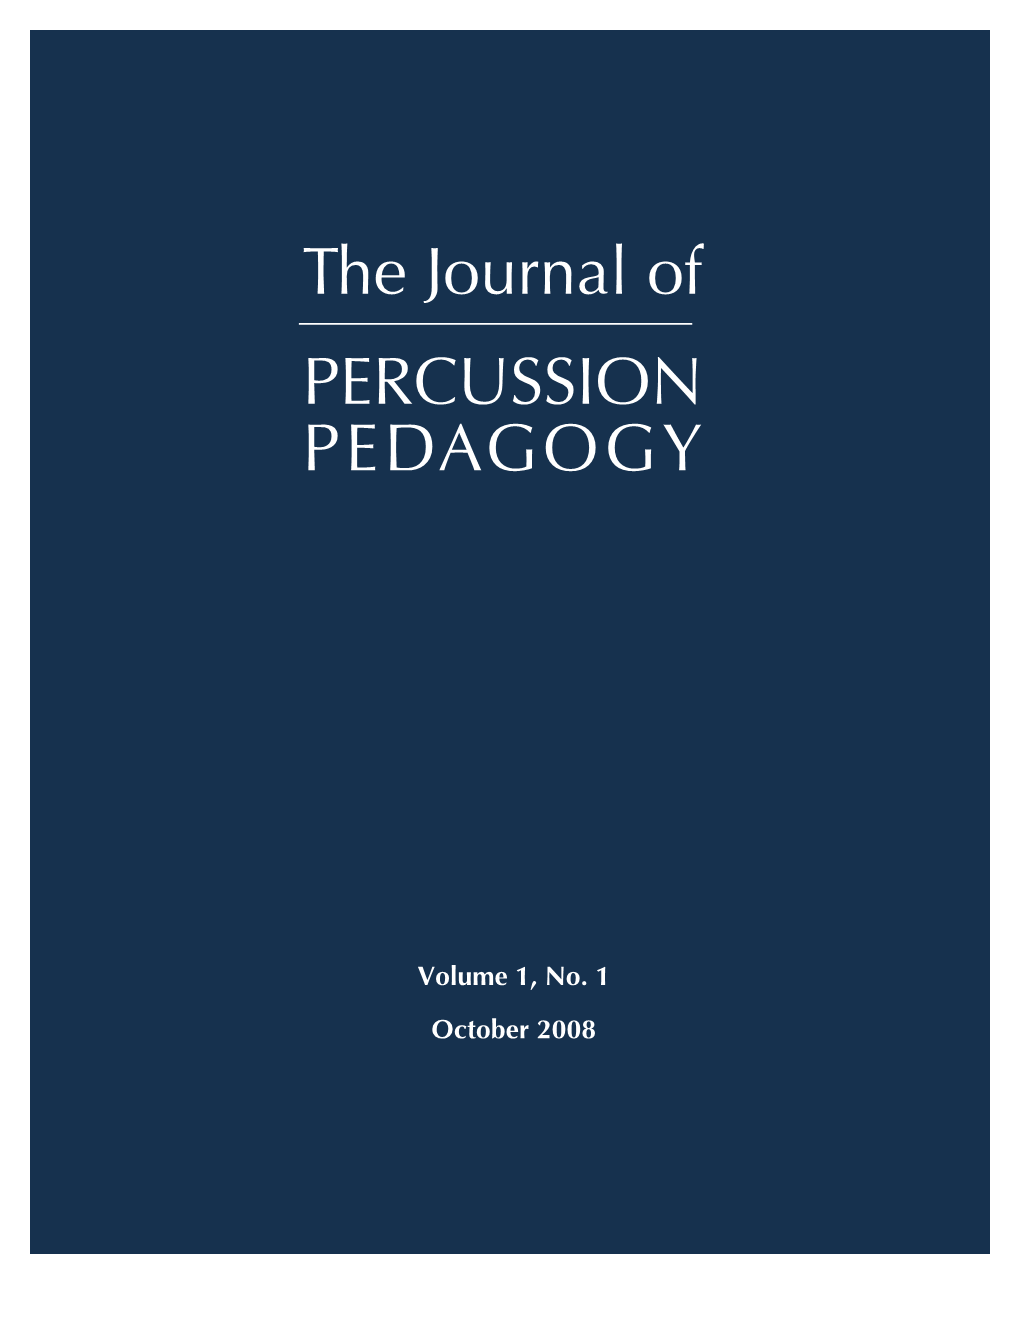 The Journal of PERCUSSION PEDAGOGY